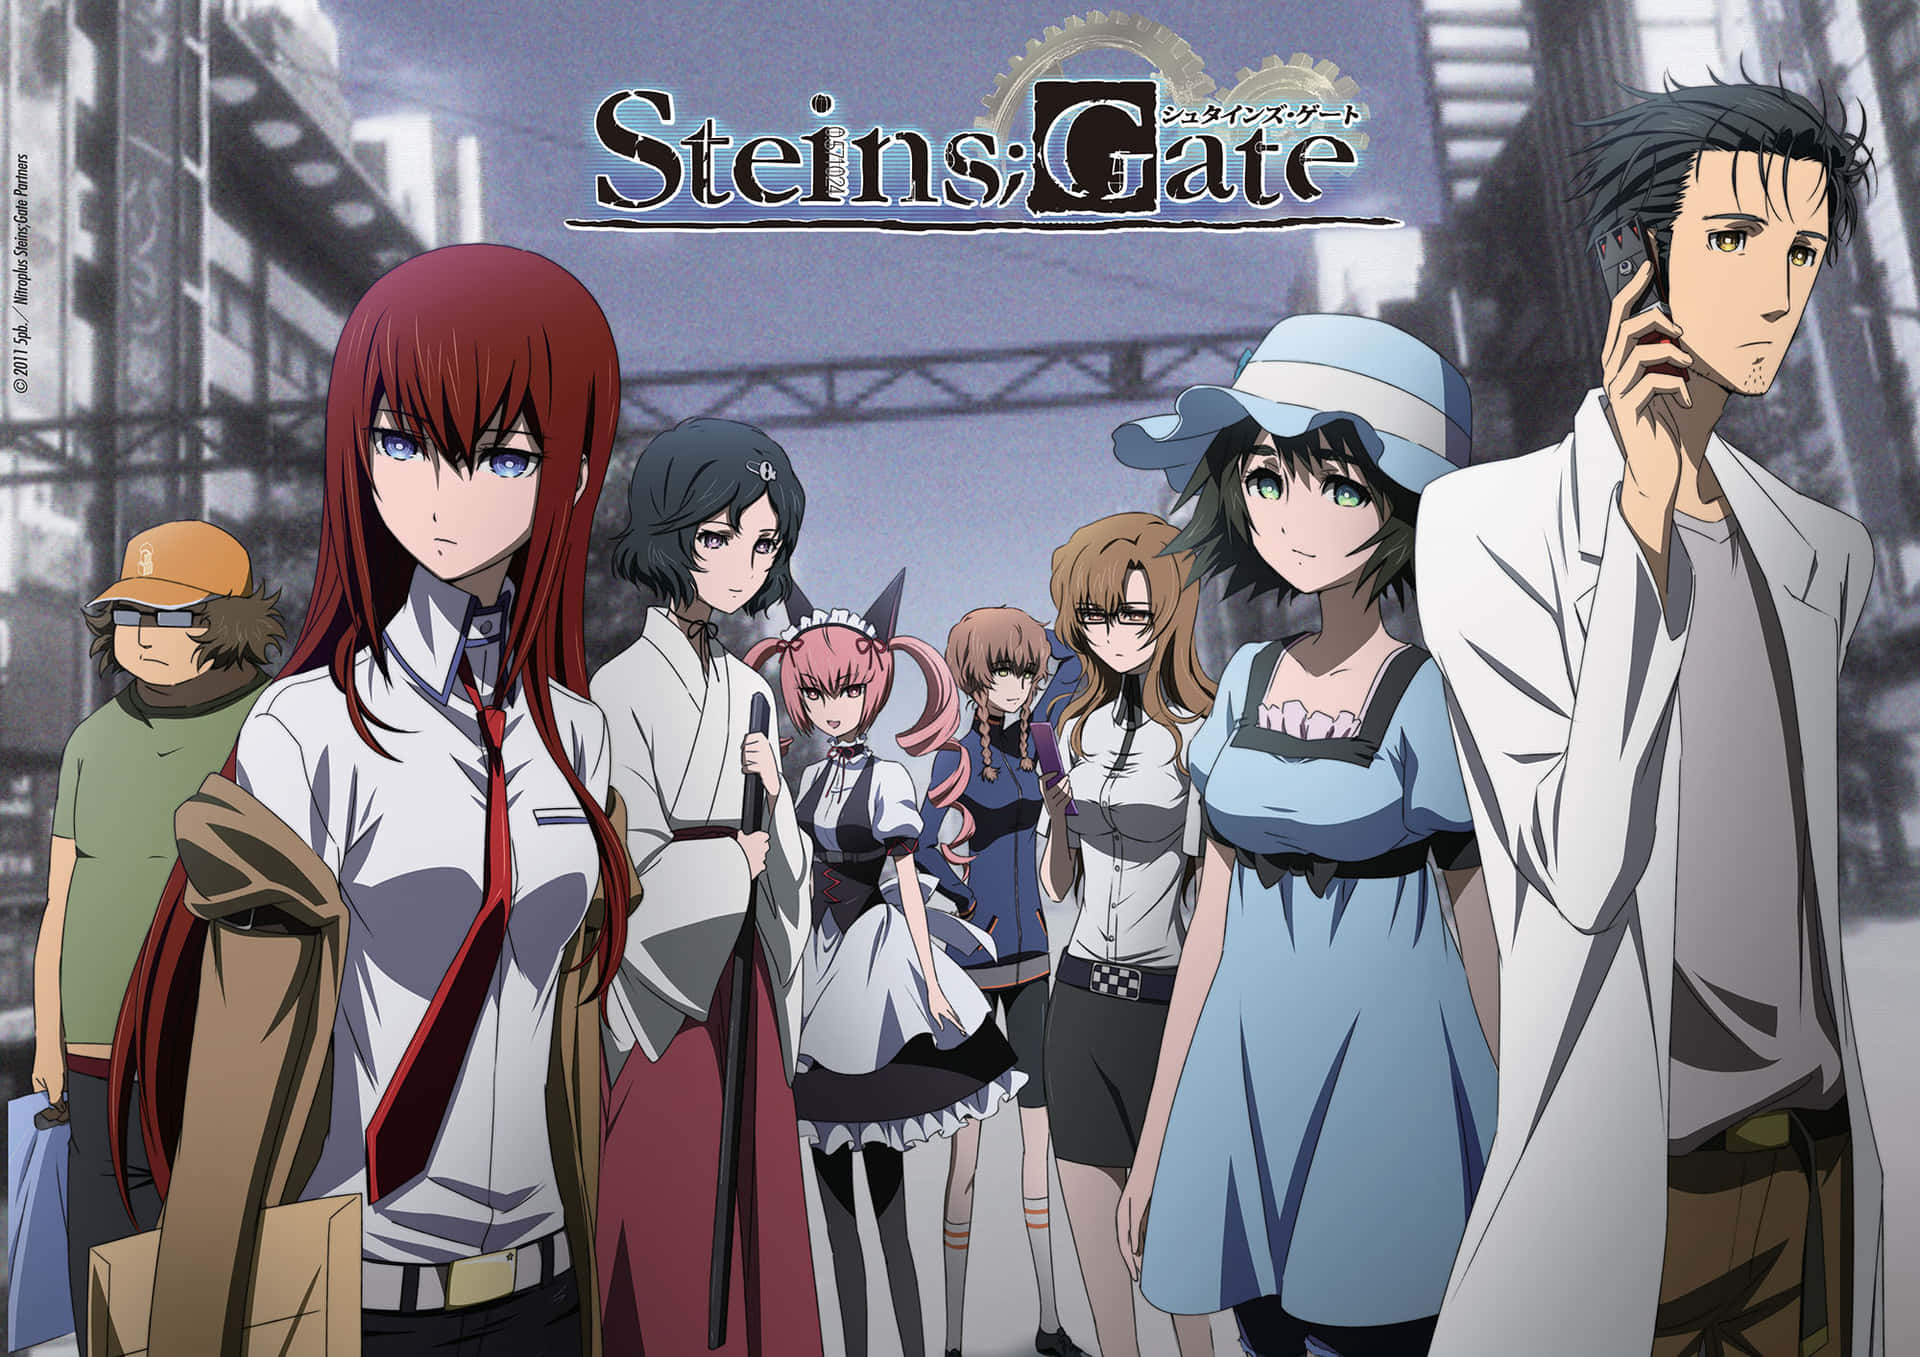 Enter the World of Steins Gate.